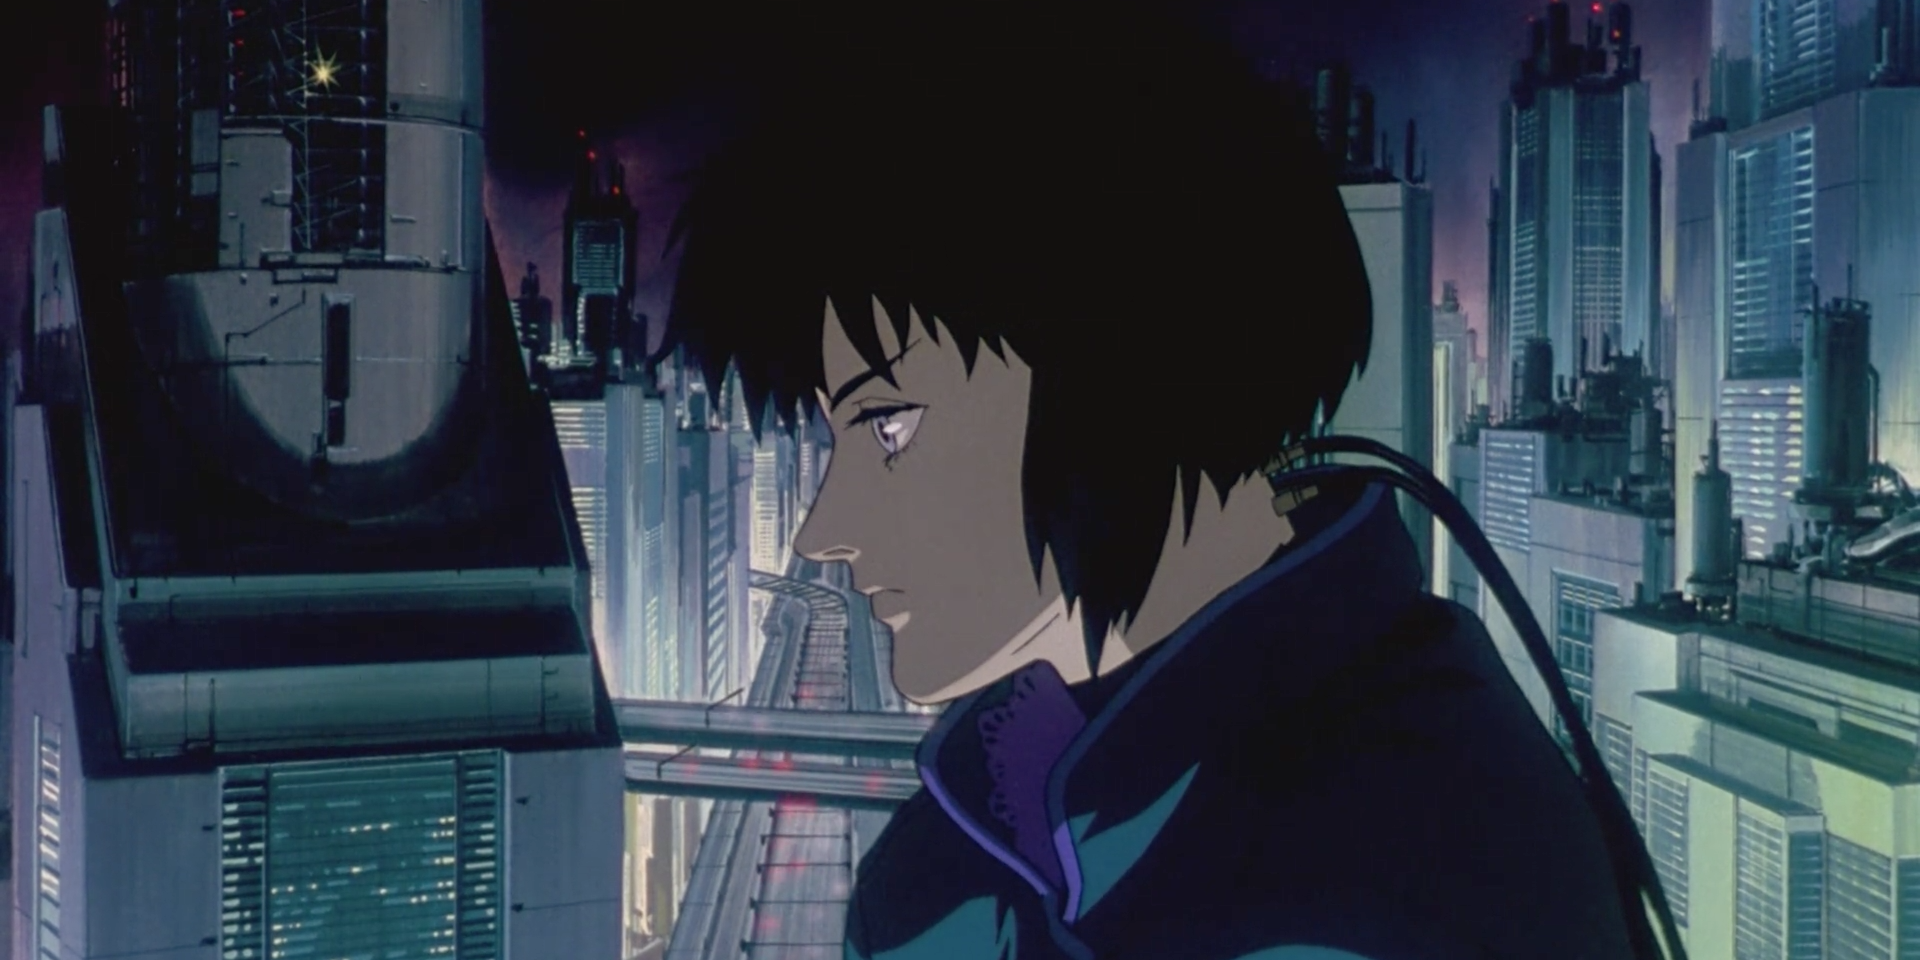 Still of the 1995 anime movie Ghost in the Shell.